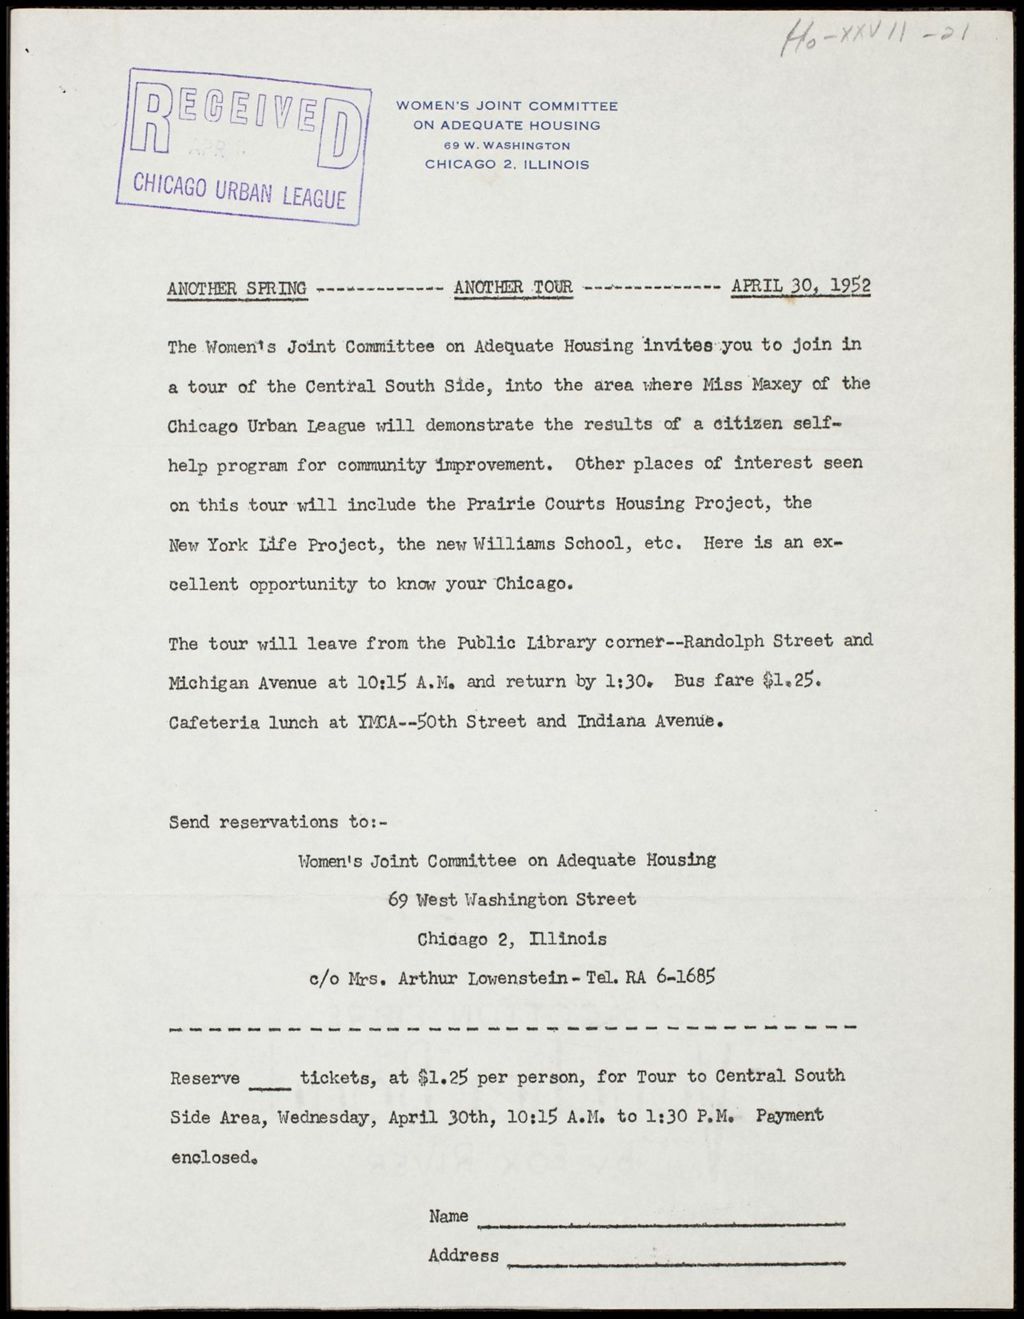 Miniature of Women's Joint Committee on Adequate Housing, 1949-1954 (Folder I-2760)